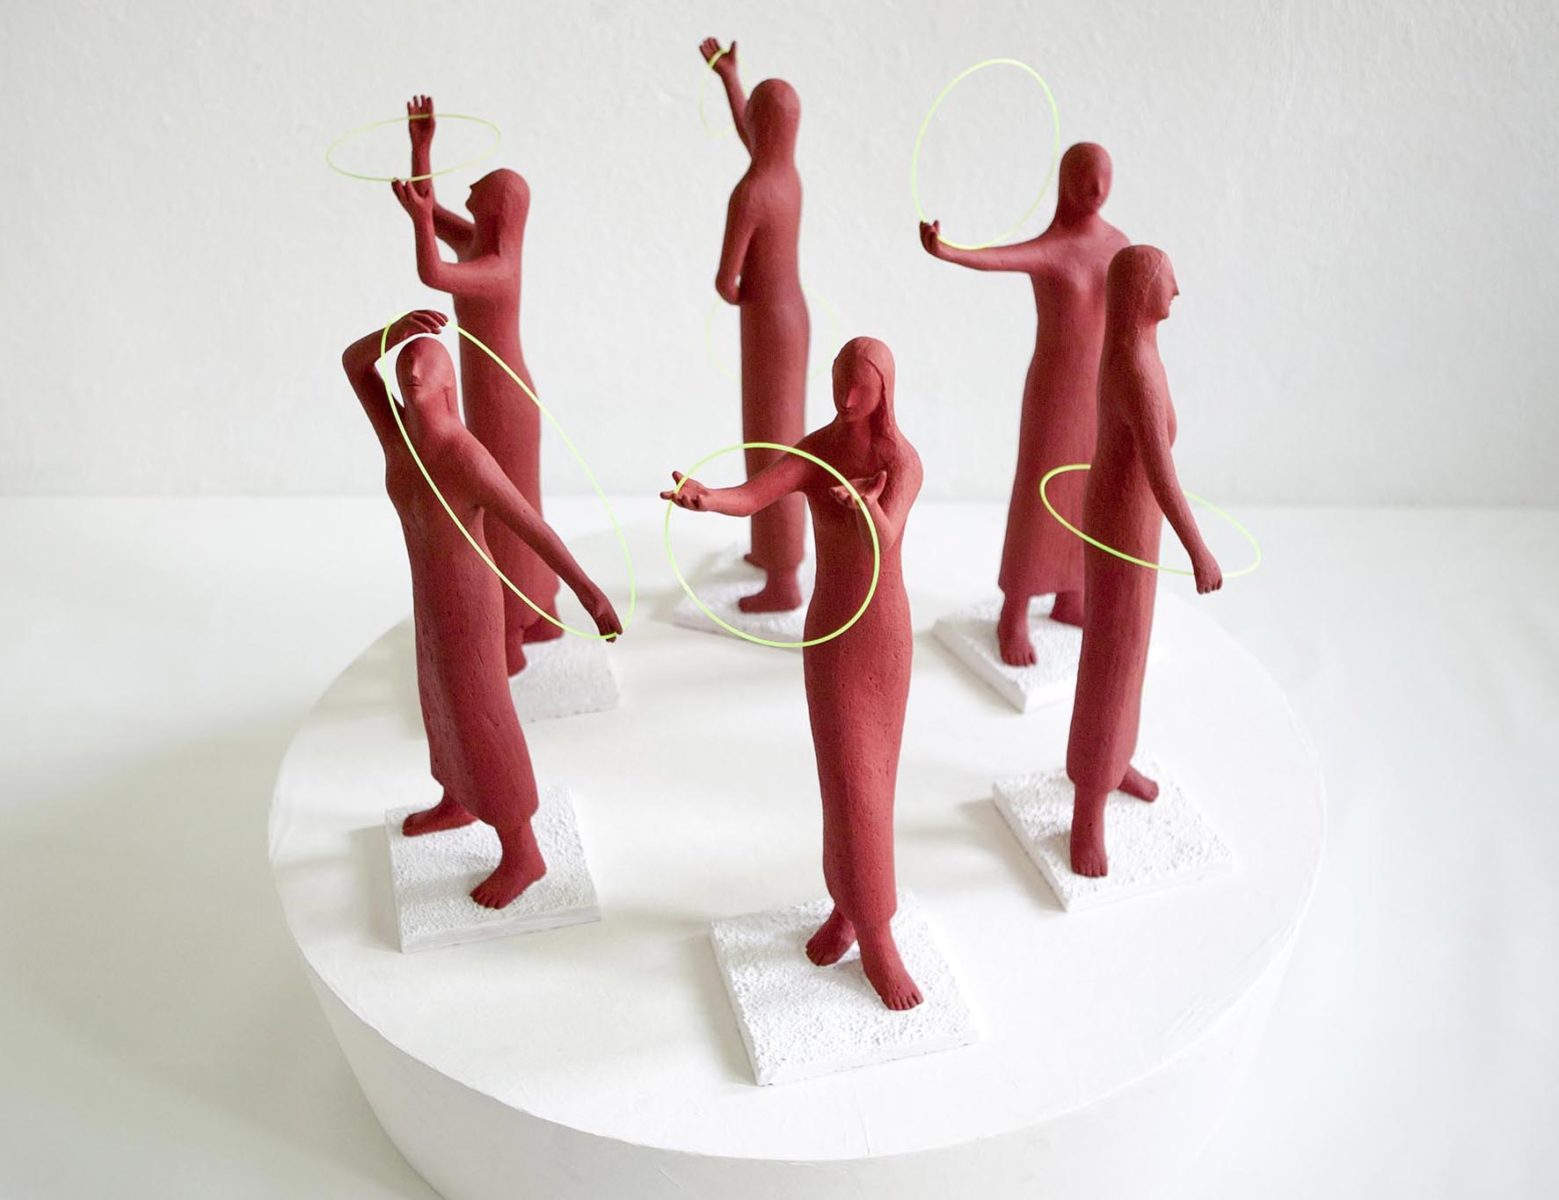 The composition of red women 2004, Sculpture by Kazumasa Mizokami, Six red female statues forming a circle, dancing with a thin yellow hoop.